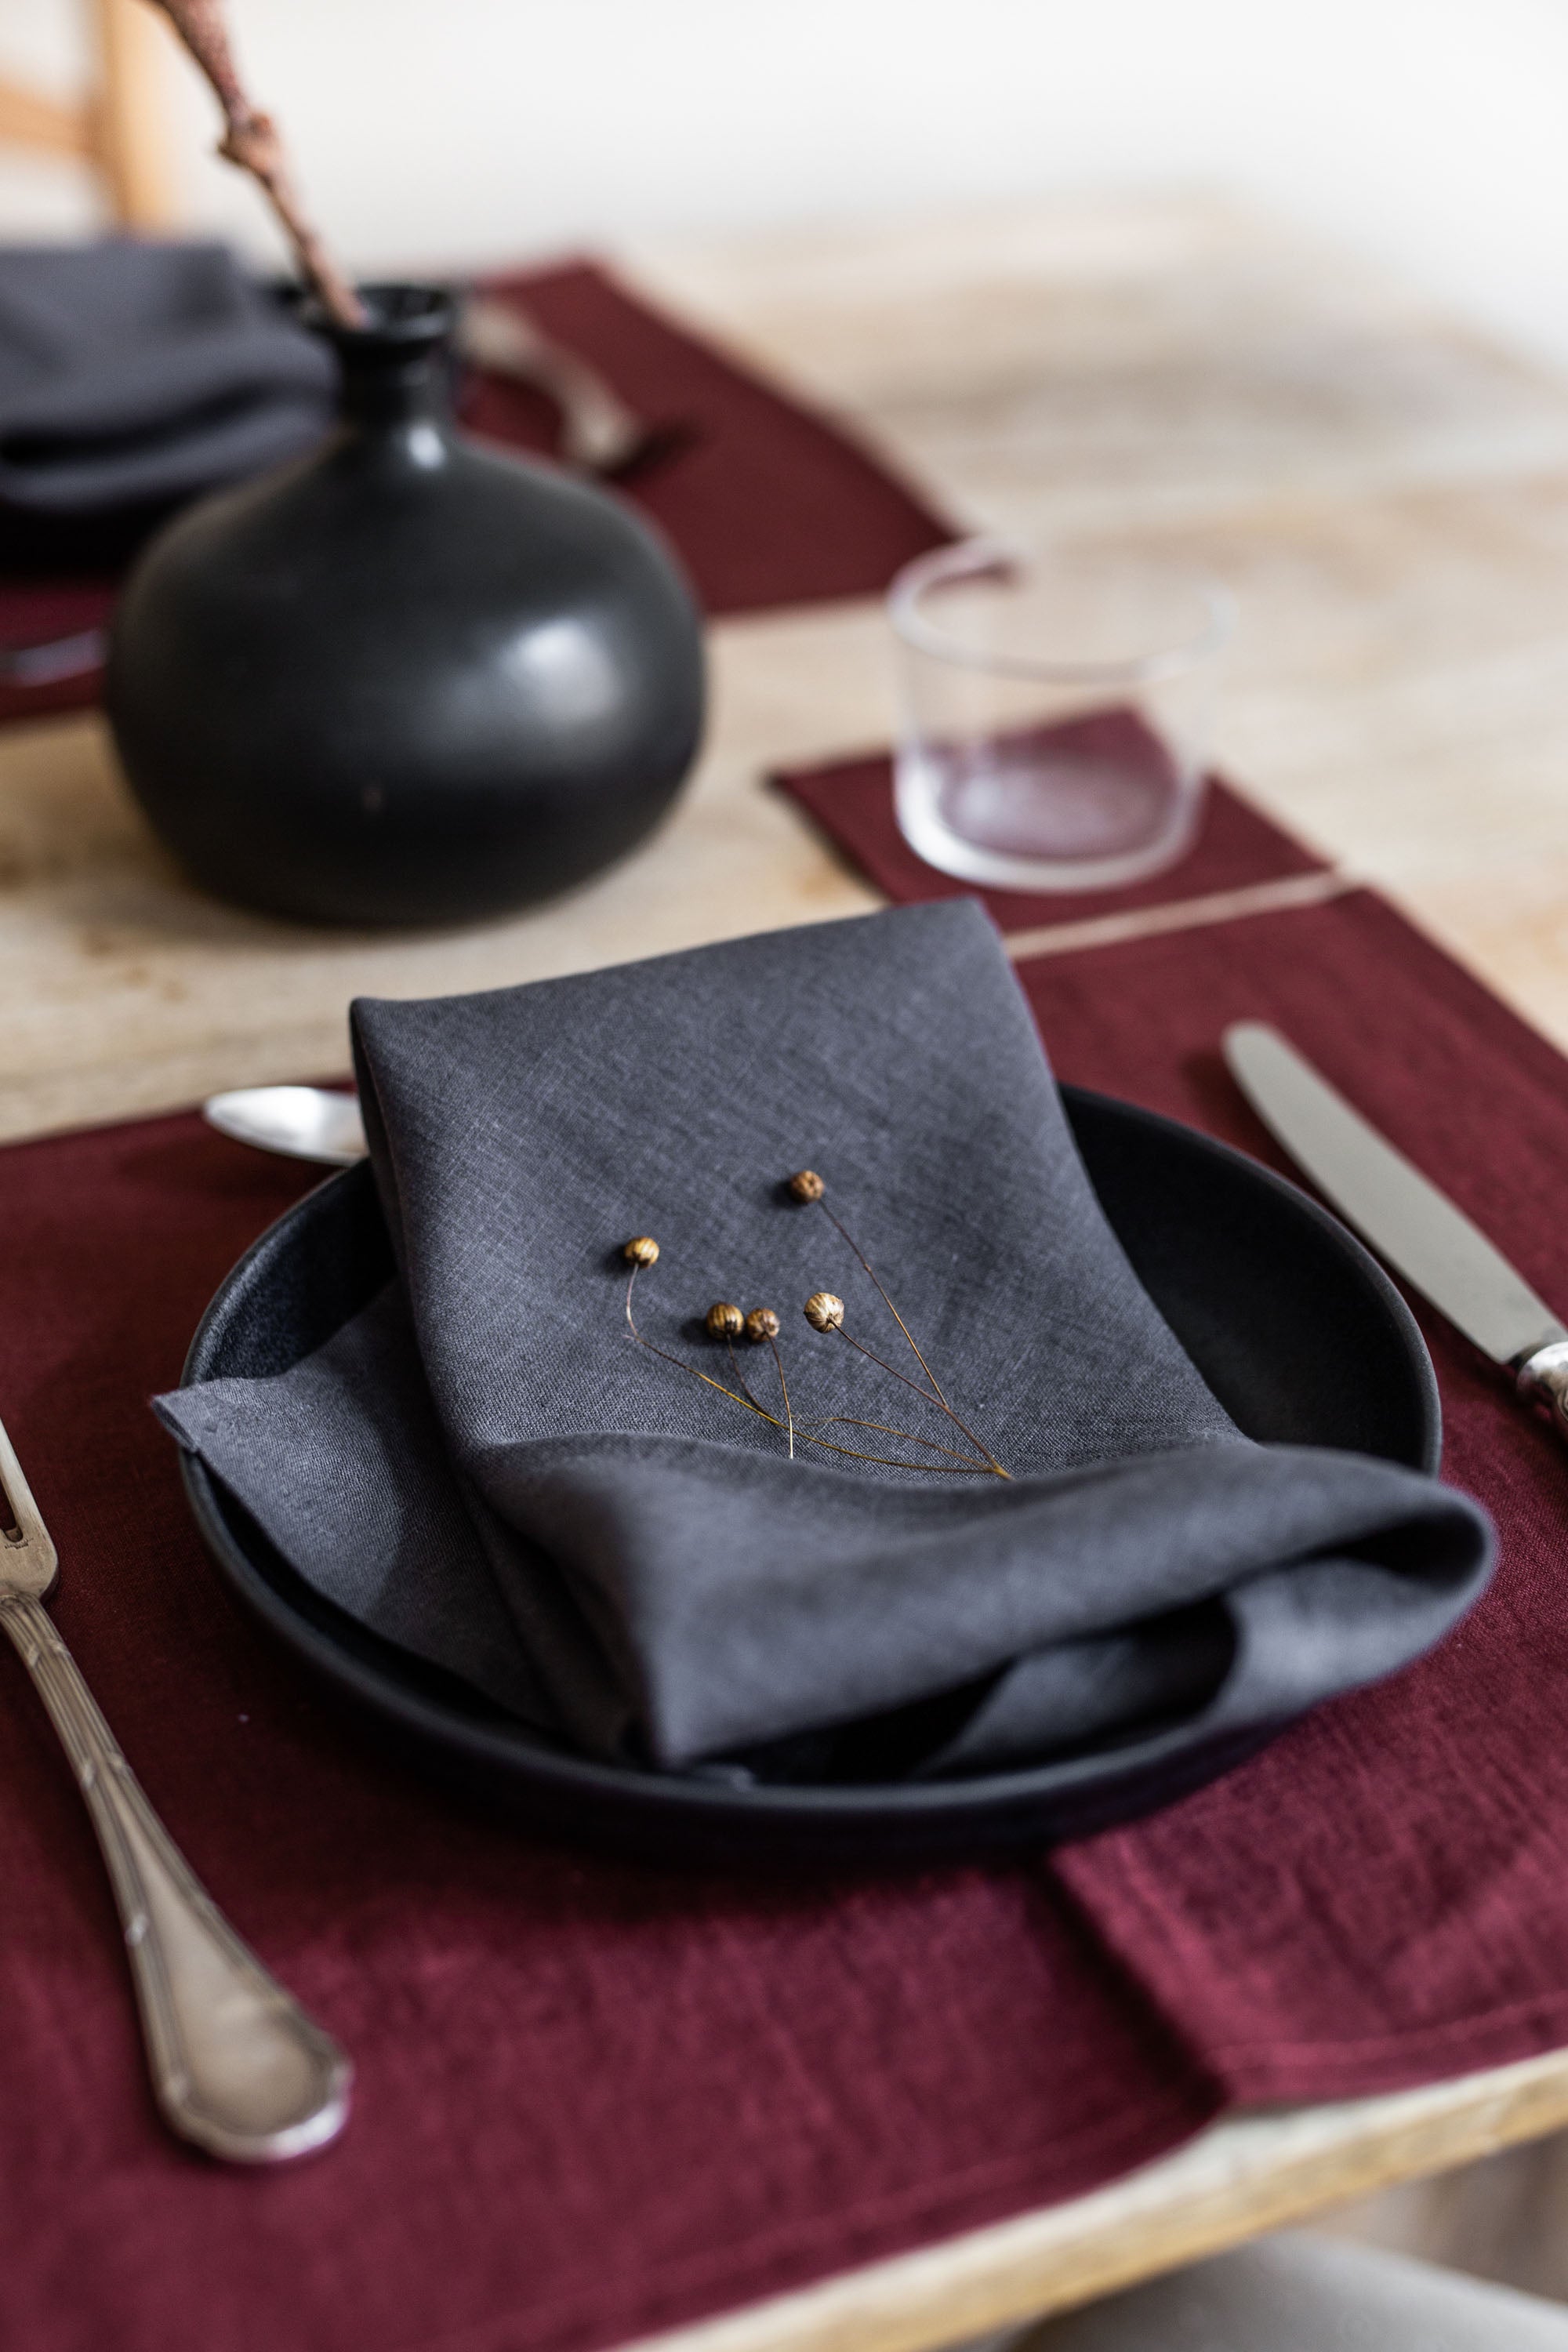 Set Dinner Table With A Focus on Charcoal Linen Napkins By AmourlInen